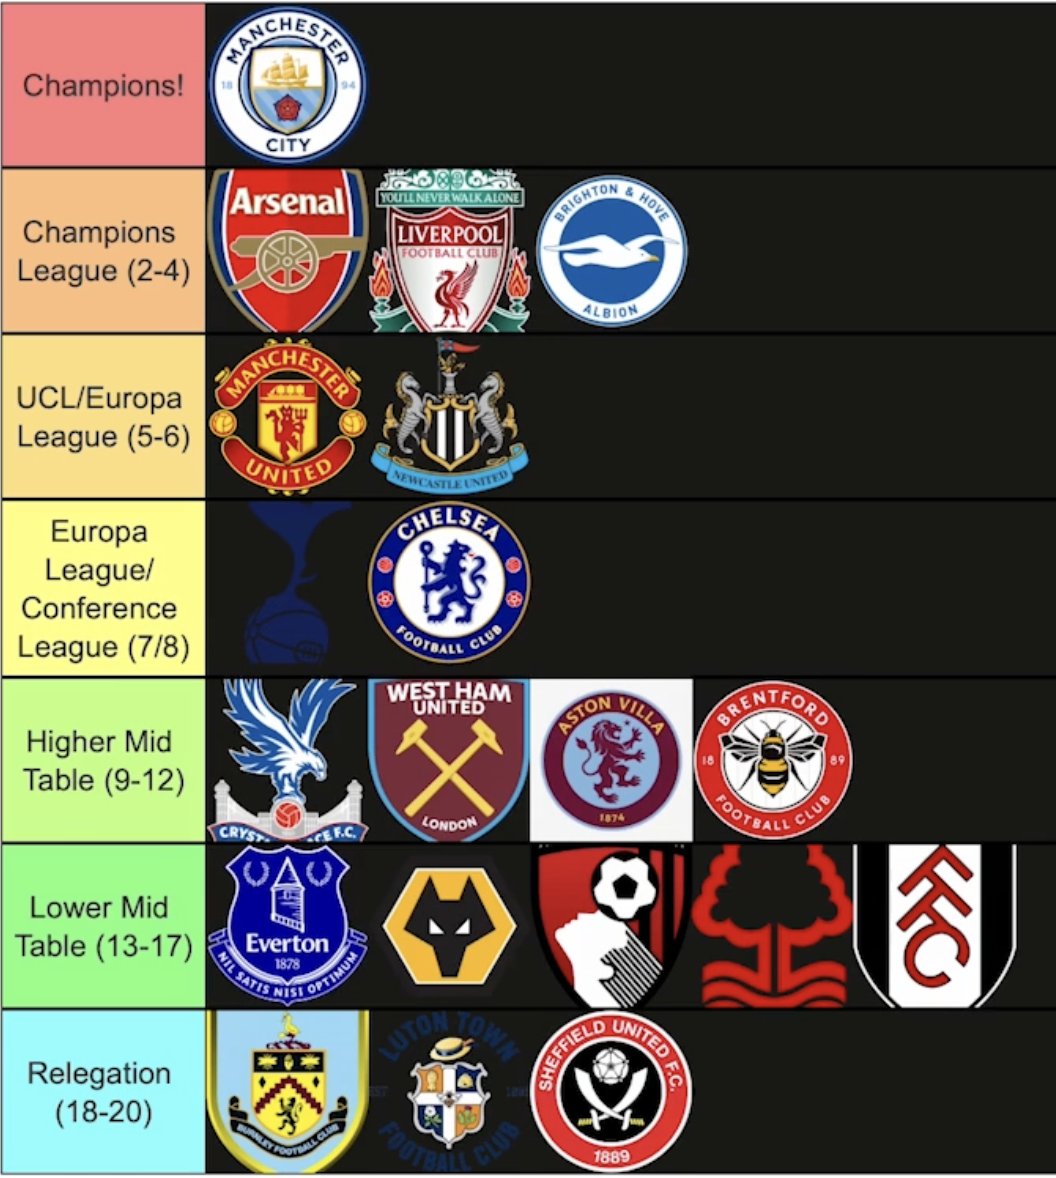 My PL Predictions from September 2023. Champions, Top 3, Relegated: ✅ City, Arsenal, Liverpool, Wolves ✅ Biggest Howlers: Brighton (4th) Aston Villa (11th) ❌